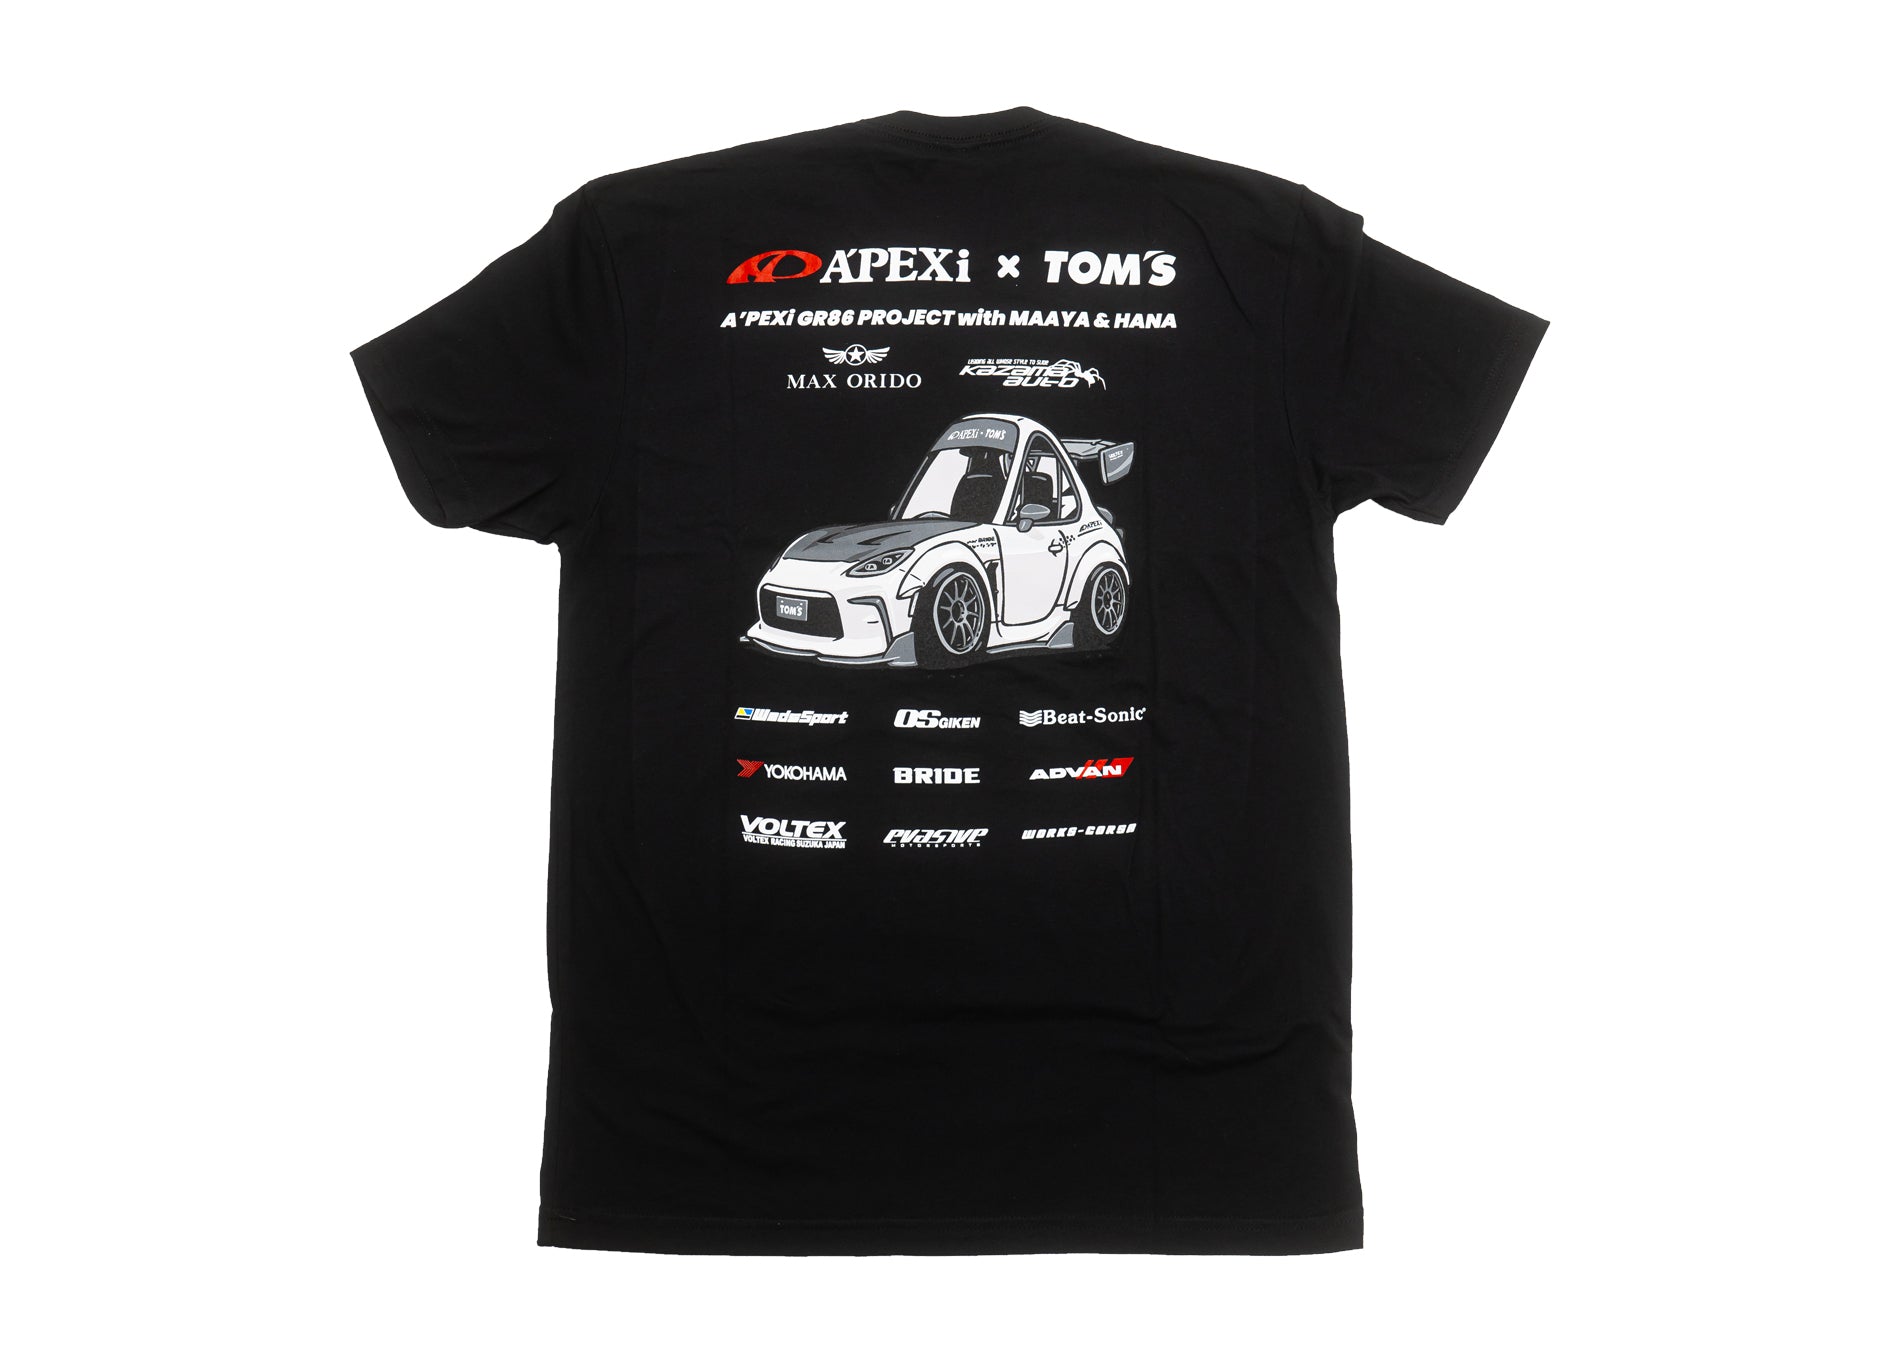 A'PEXi - A'PEXi GR86 Project Team T-Shirt ** LIMITED EDITION ** - 0